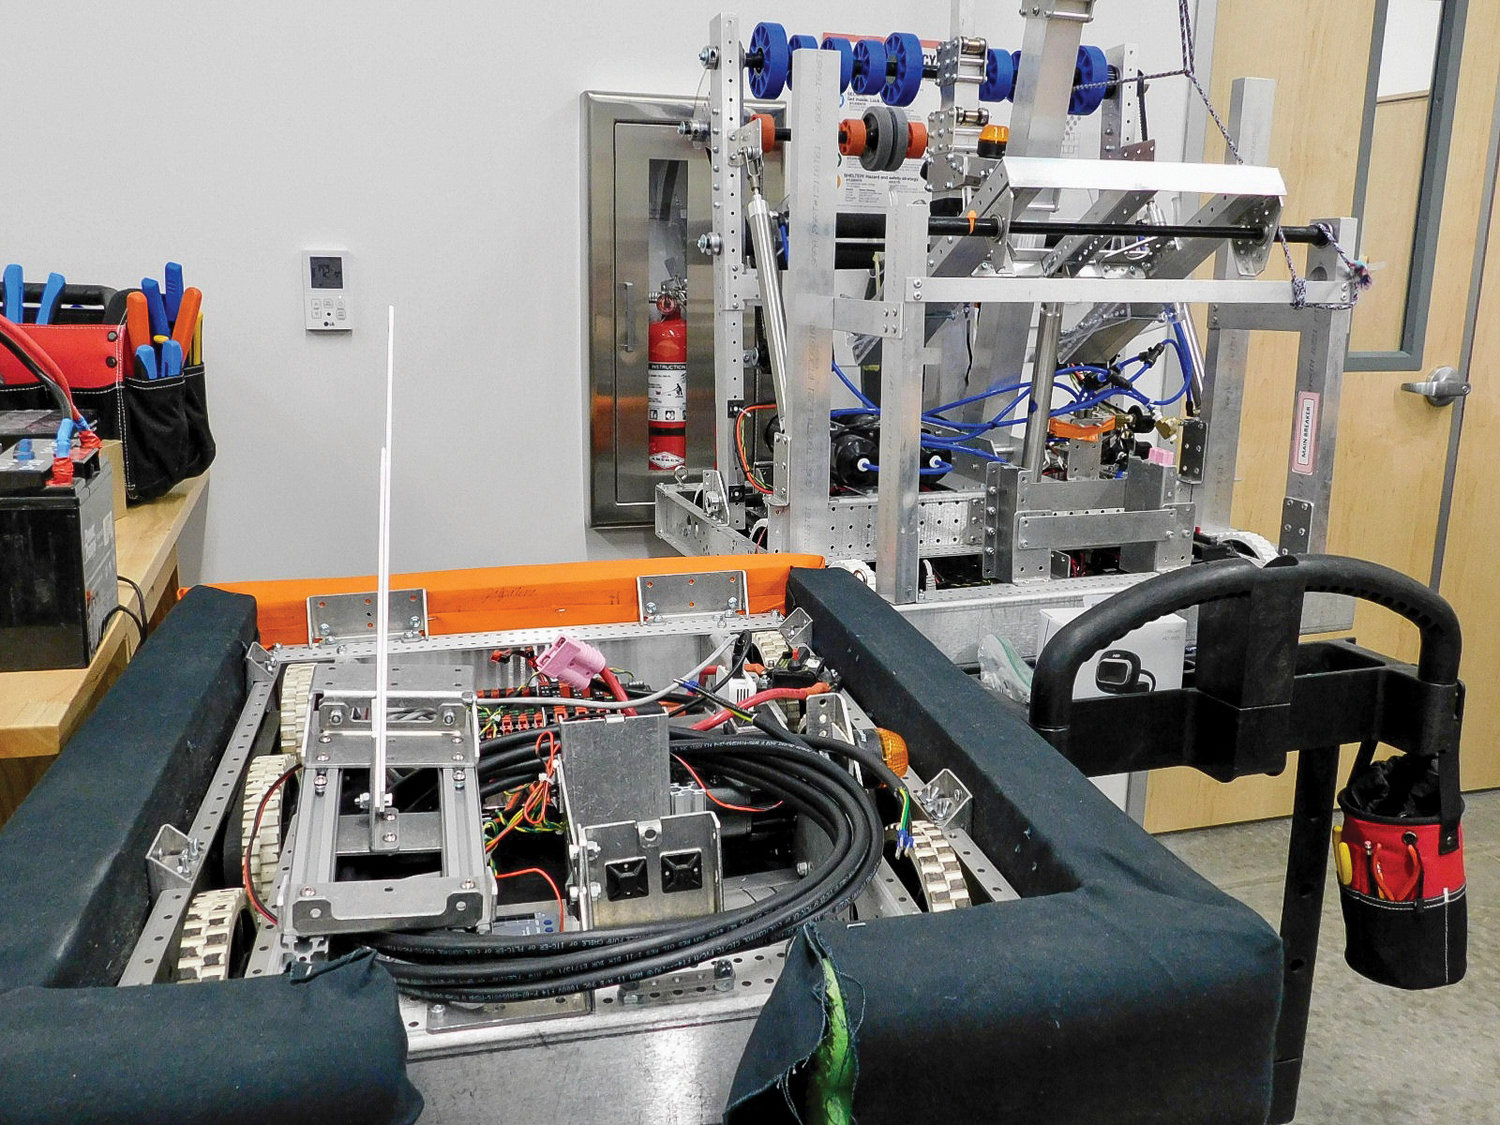 Robots are designed to perform specific tasks in competitions by Steel Ridge Robotics.